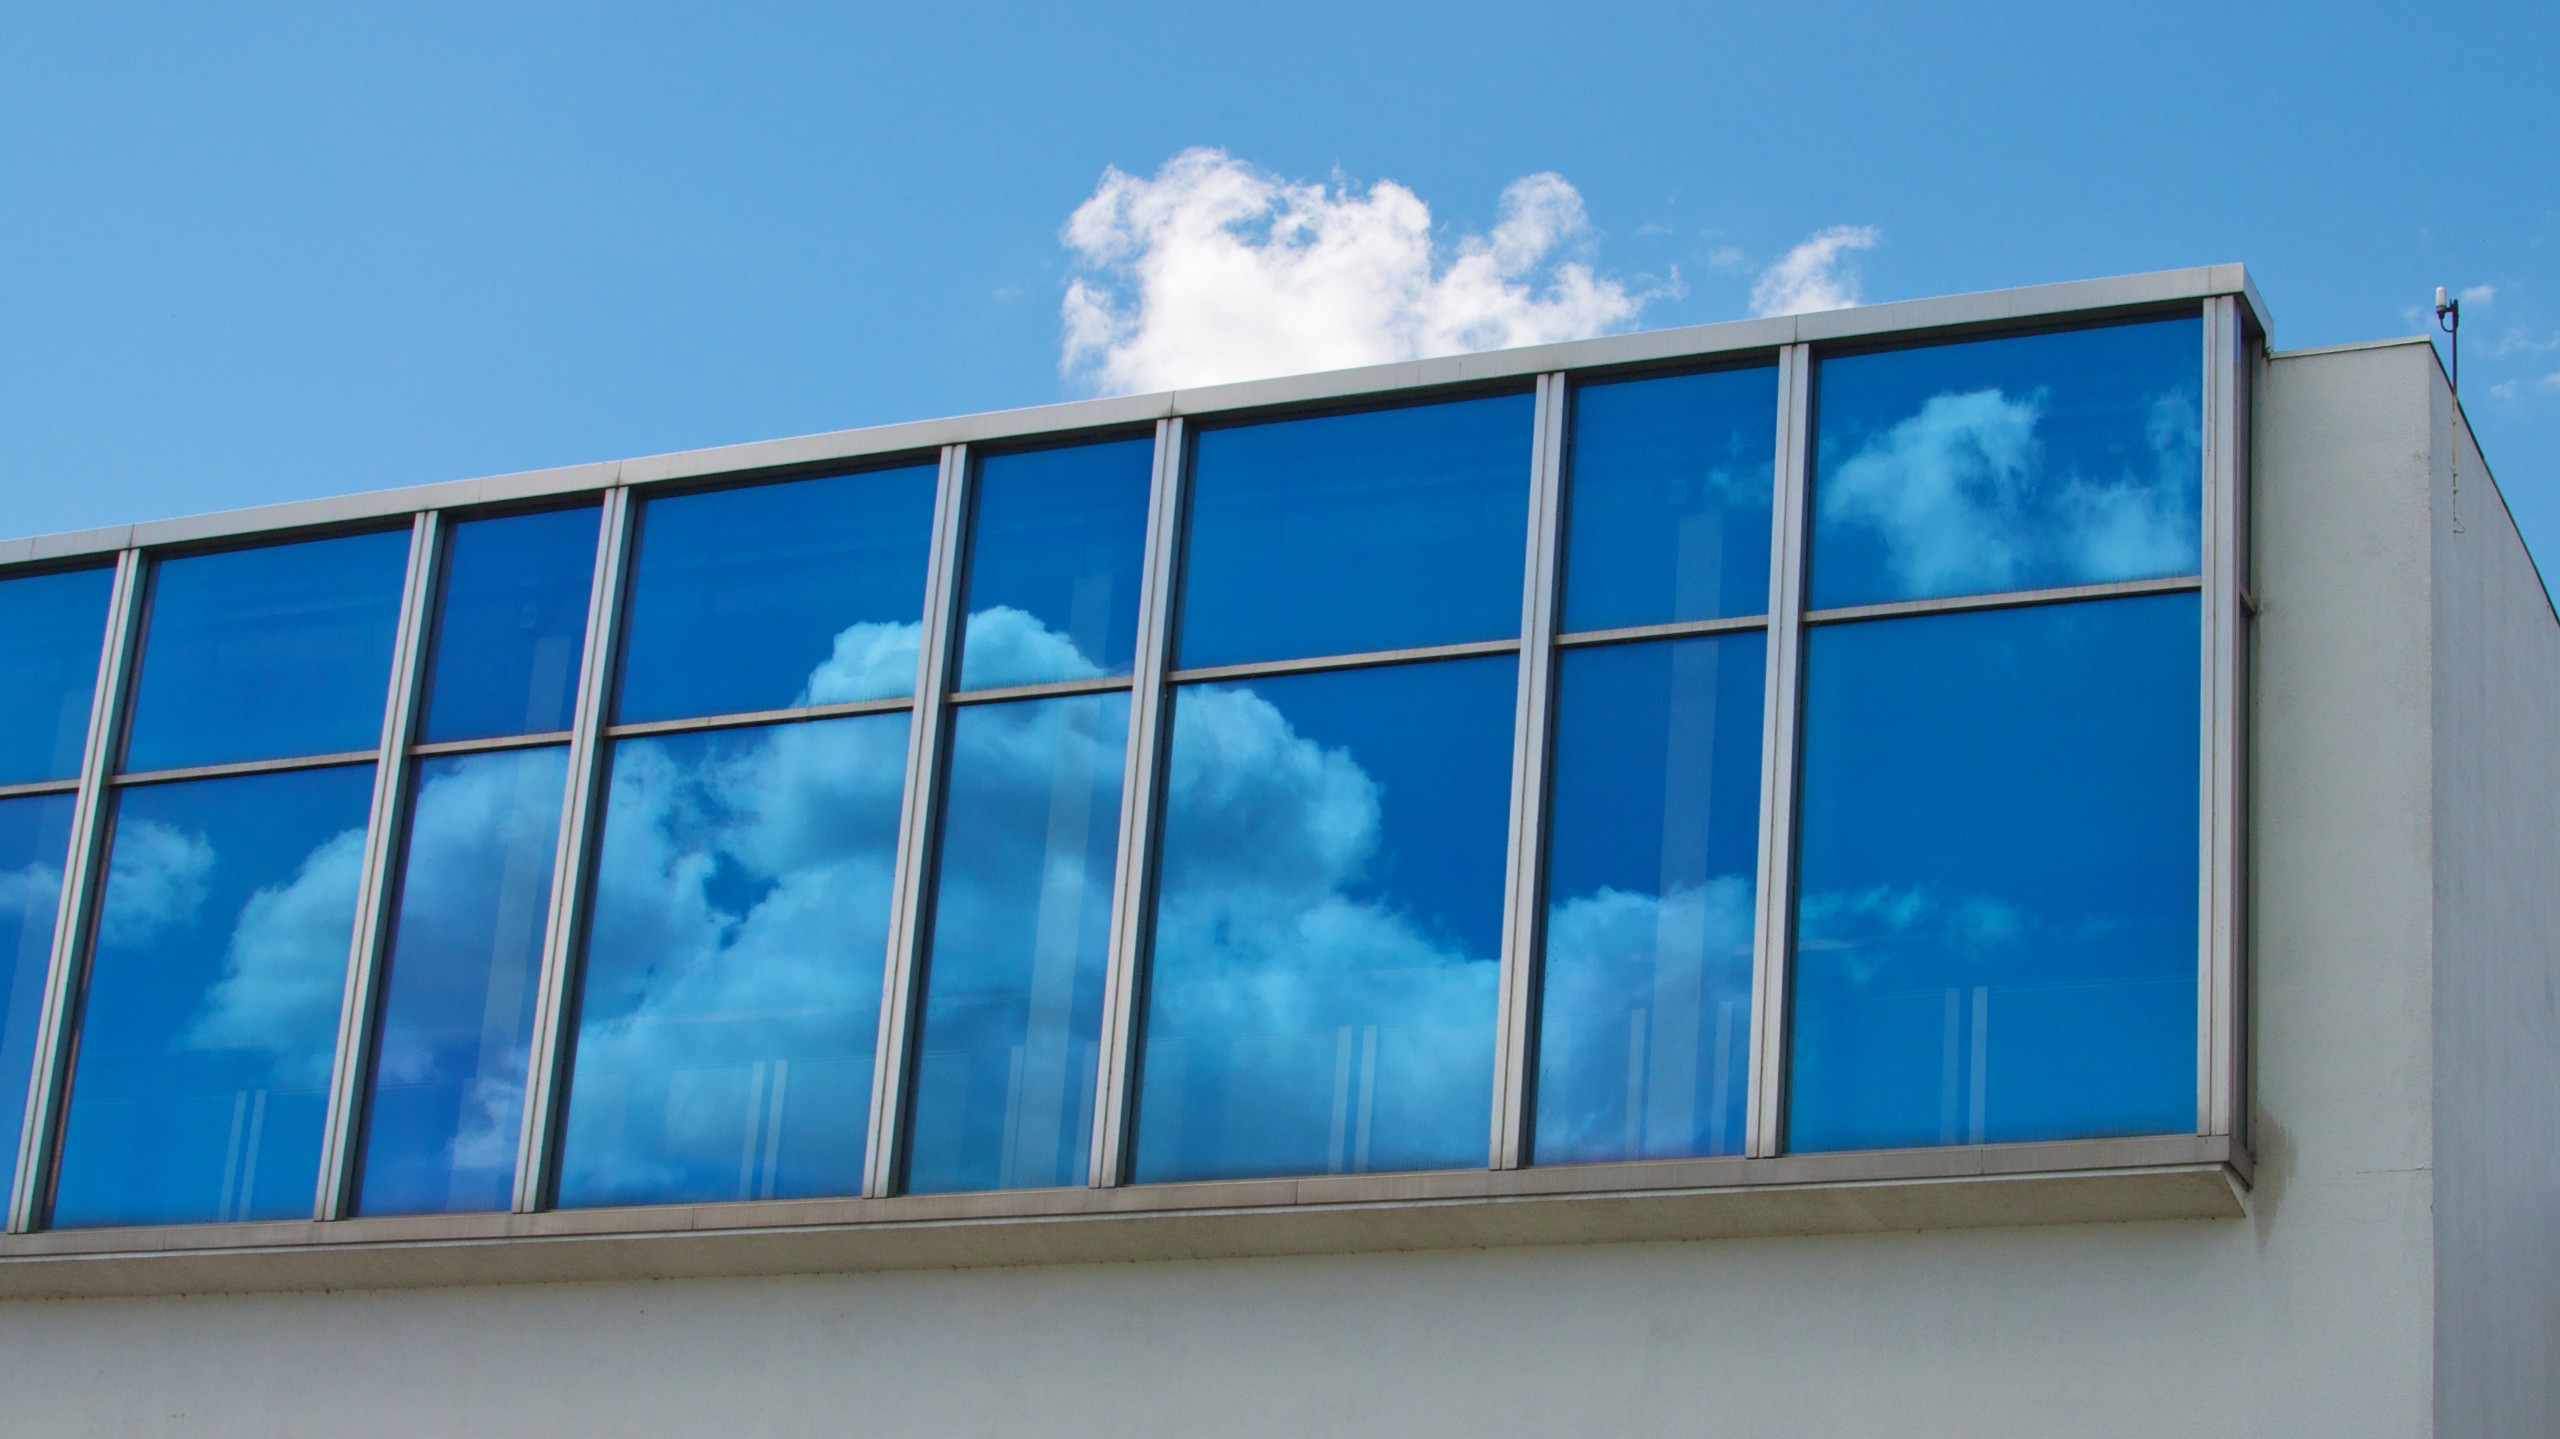 Clouds reflected in the windows of an office.